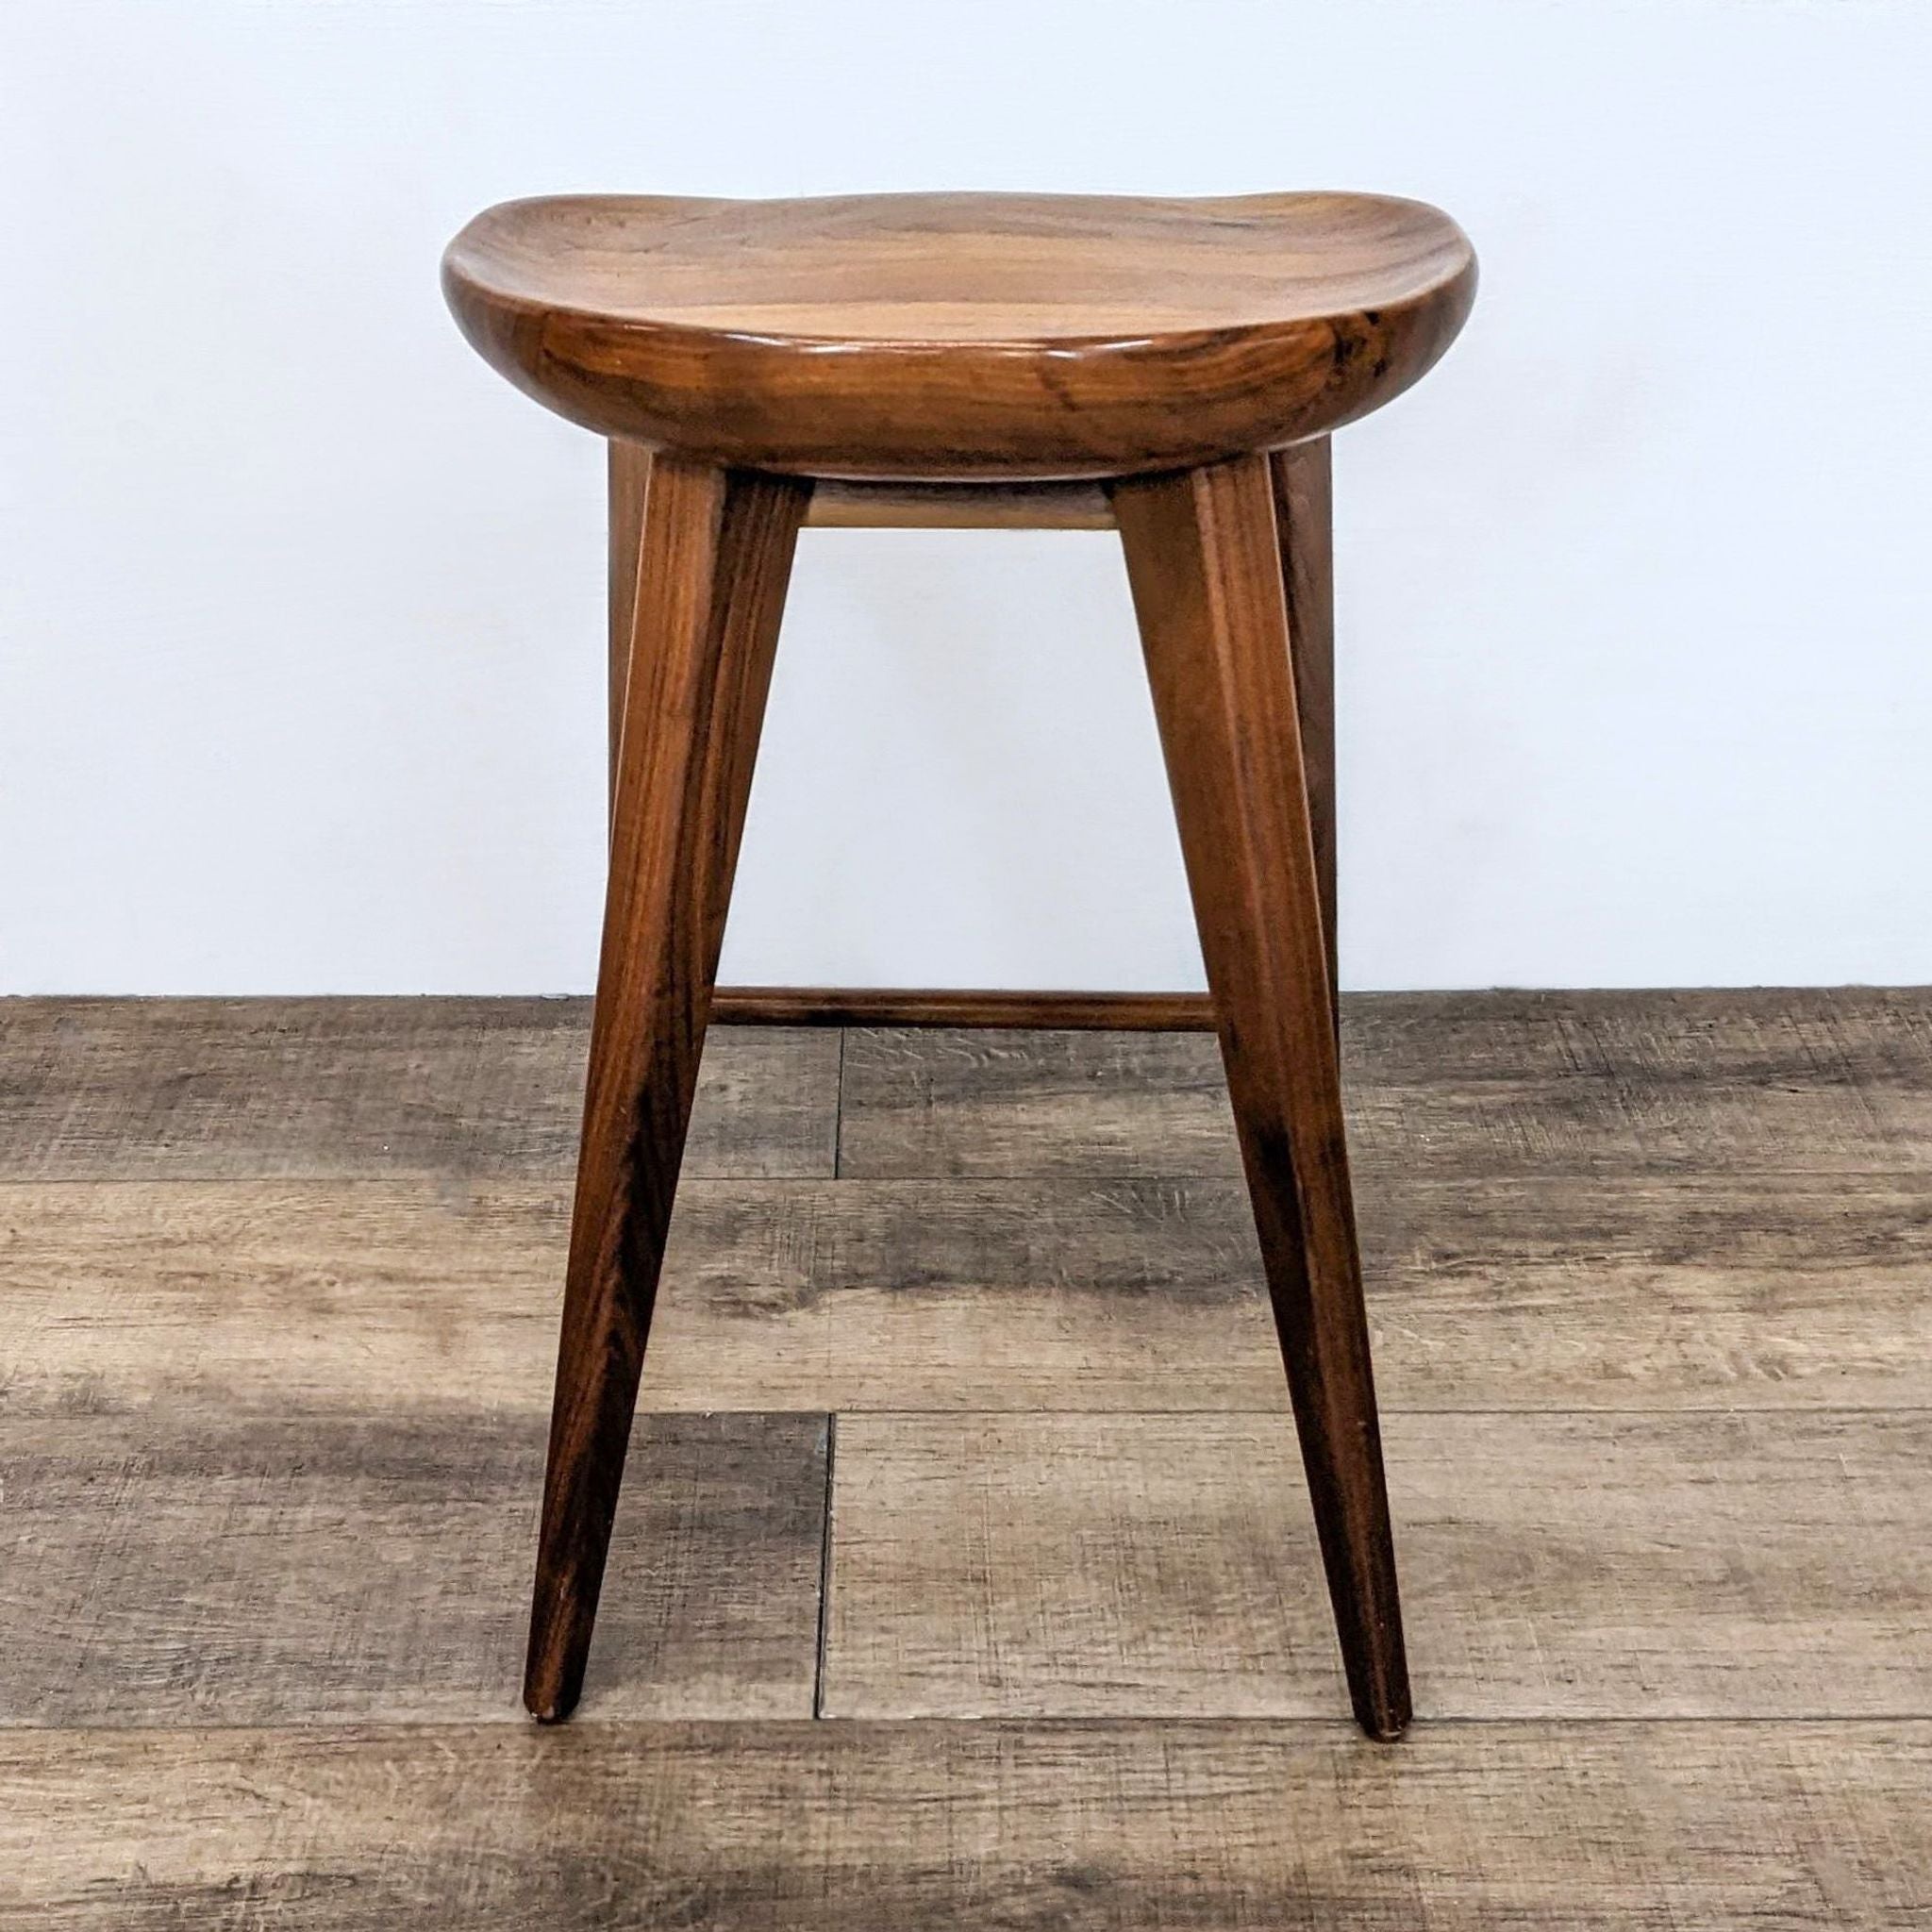 3. Angled view of a Rejuvenation solid wood stool, highlighting its sturdy design and polished surface.